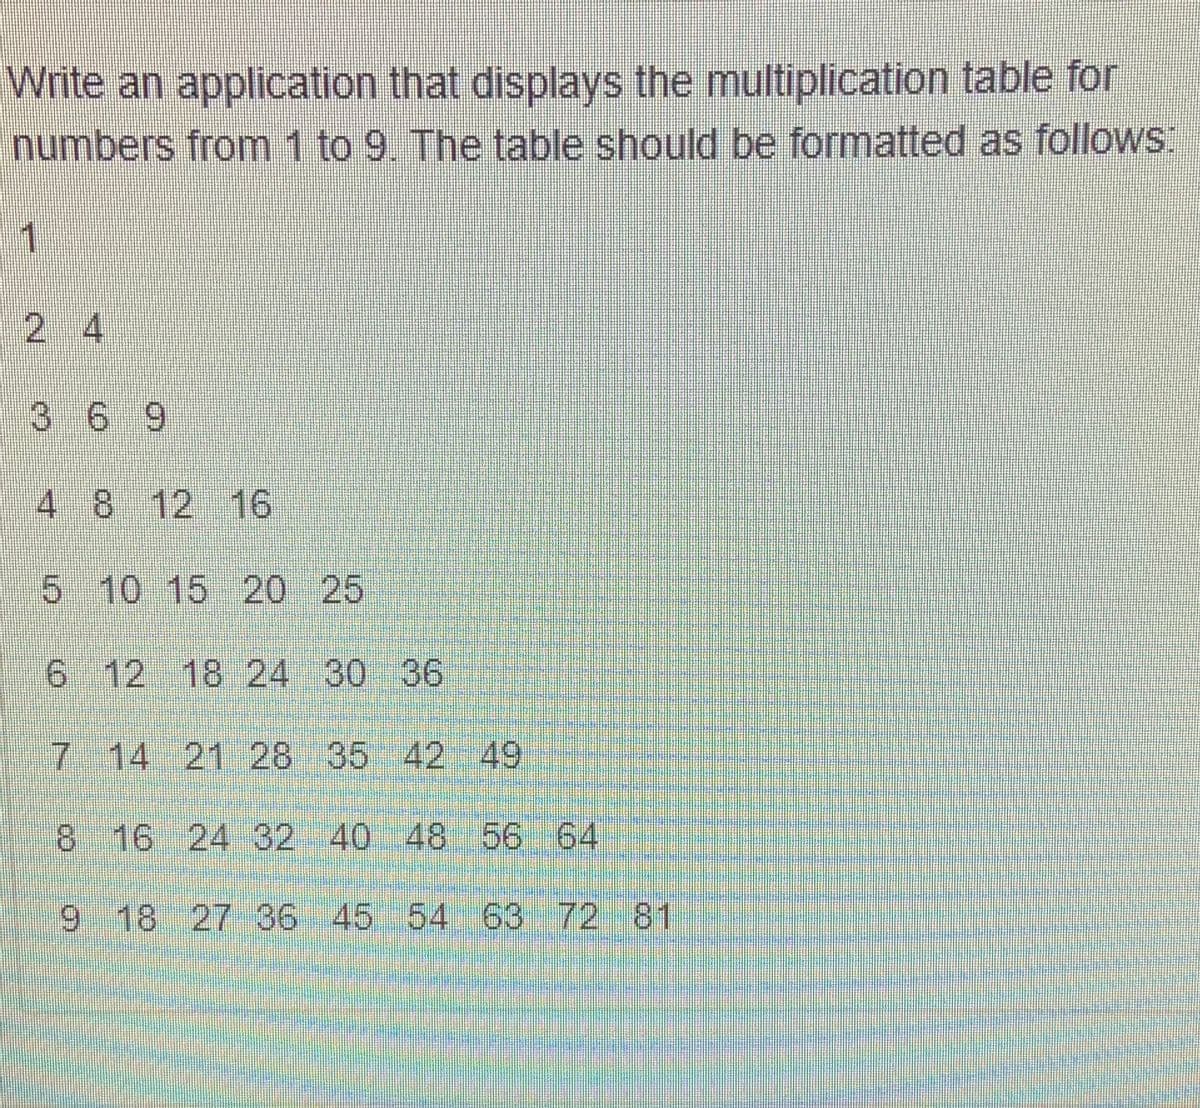 Write an application that displays the multiplication table for
numbers from 1 to 9. The table should be formatted as follows:
11
2 4
3 6 9
48 12 16
5 10 15 20 25
6 12 18 24 30 36
7 14 21 28 35 42 49
8 16 24 32 40 48 56 64
9 18 27 36 45 54 63 72 81
